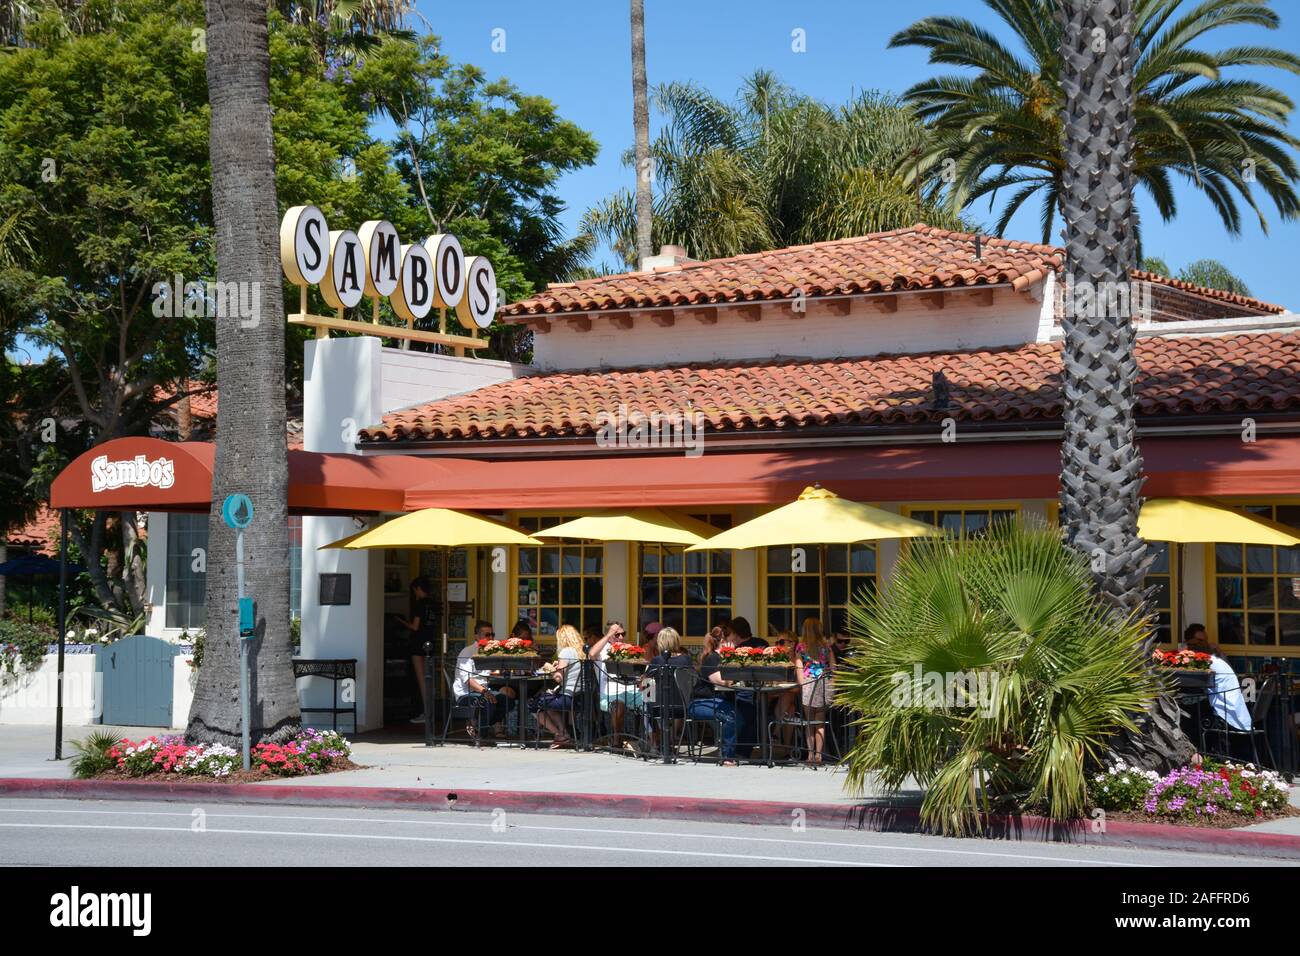 People dining on patio at Sambos restaurant, the last of the Sambos chain restaurants to remain in business, located in Santa Barbara, CA, USA Stock Photo